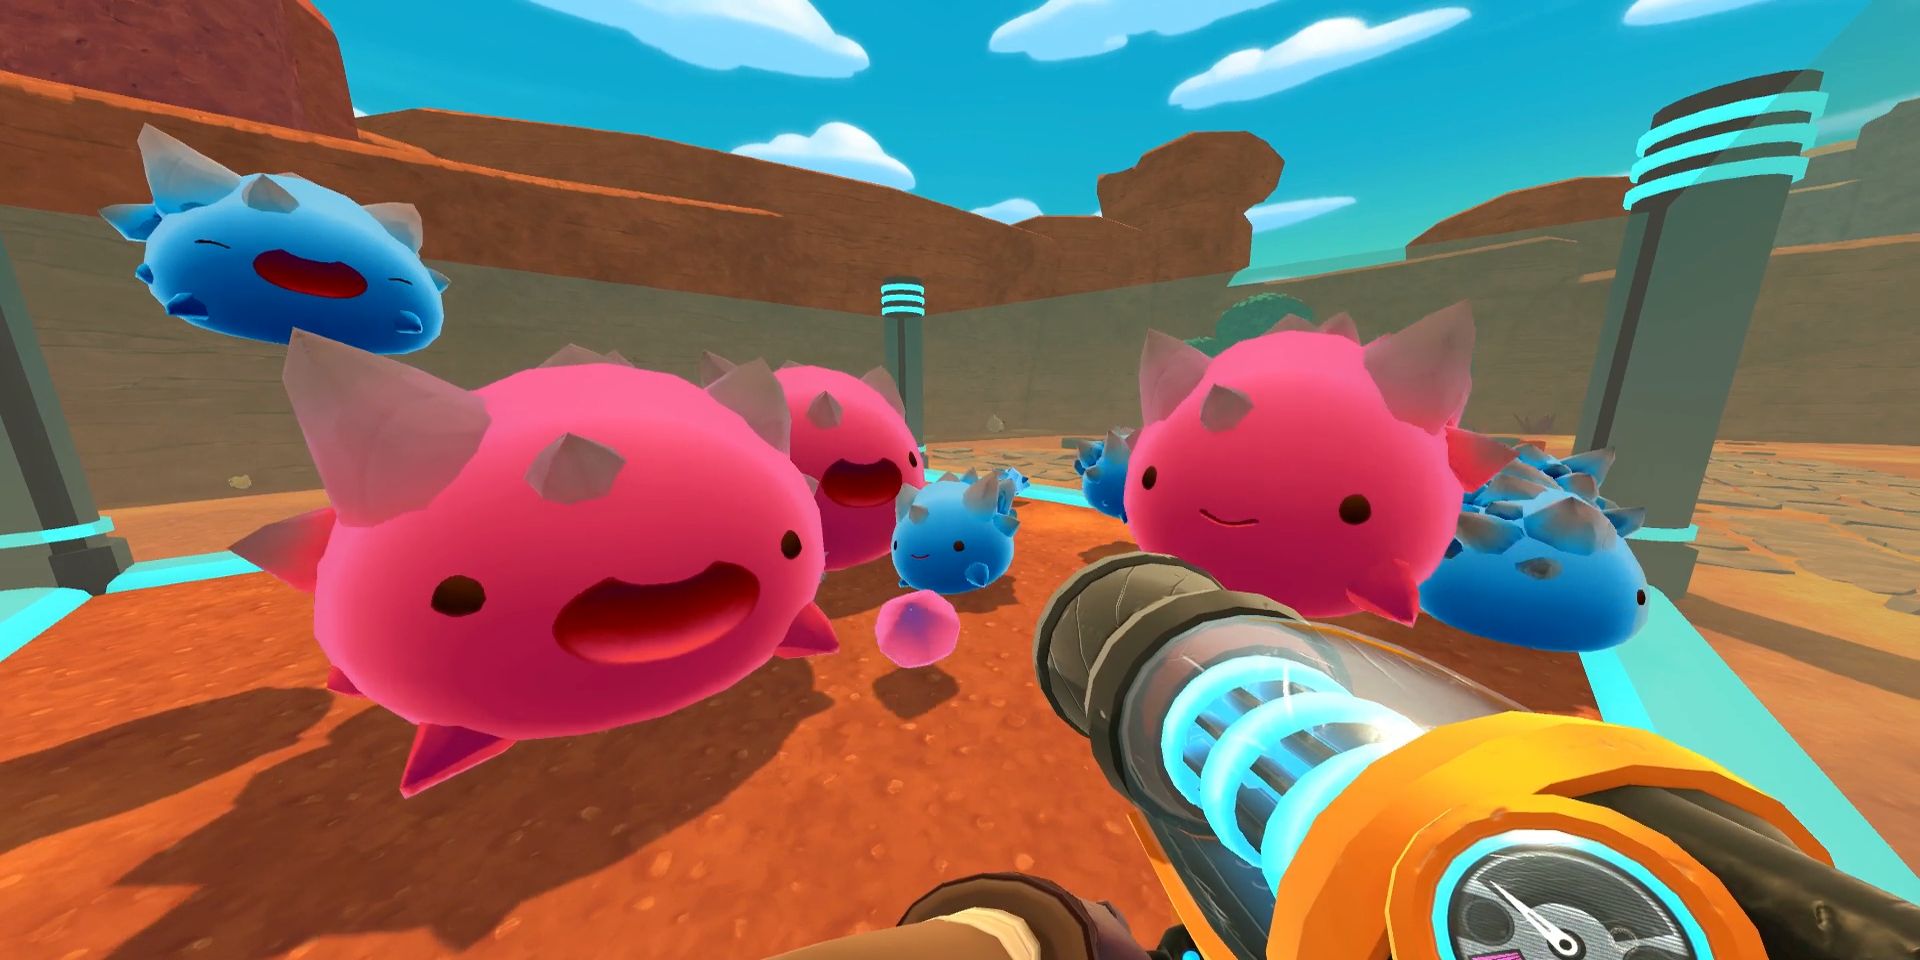 A screenshot from the video game Slime Rancher.